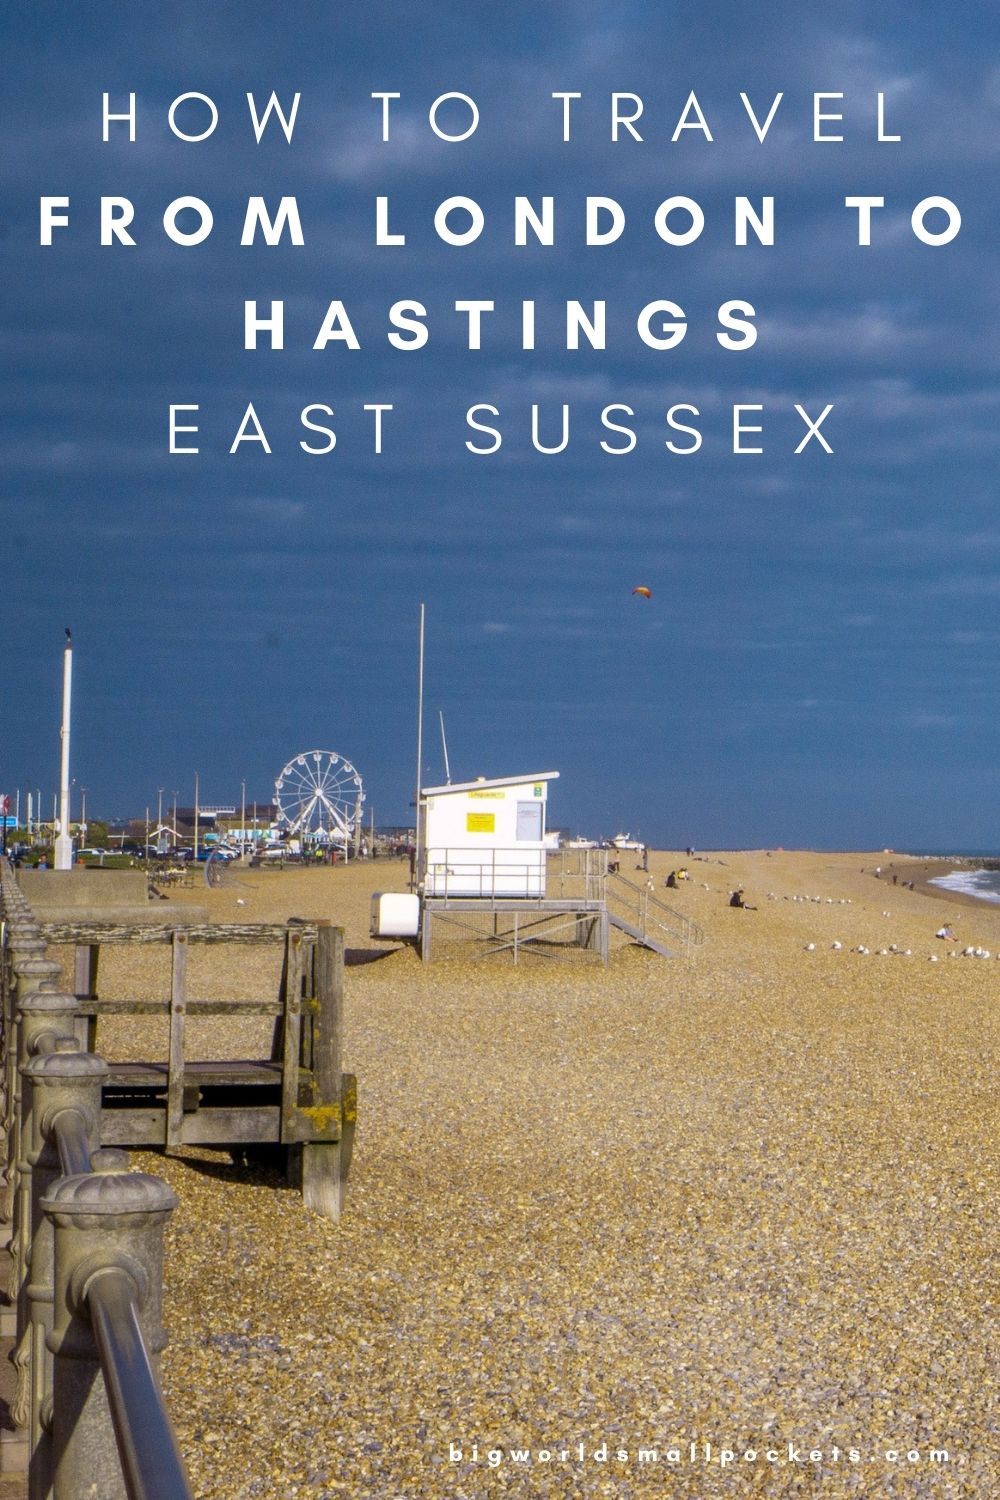 How to Travel from London to Hastings, East Sussex